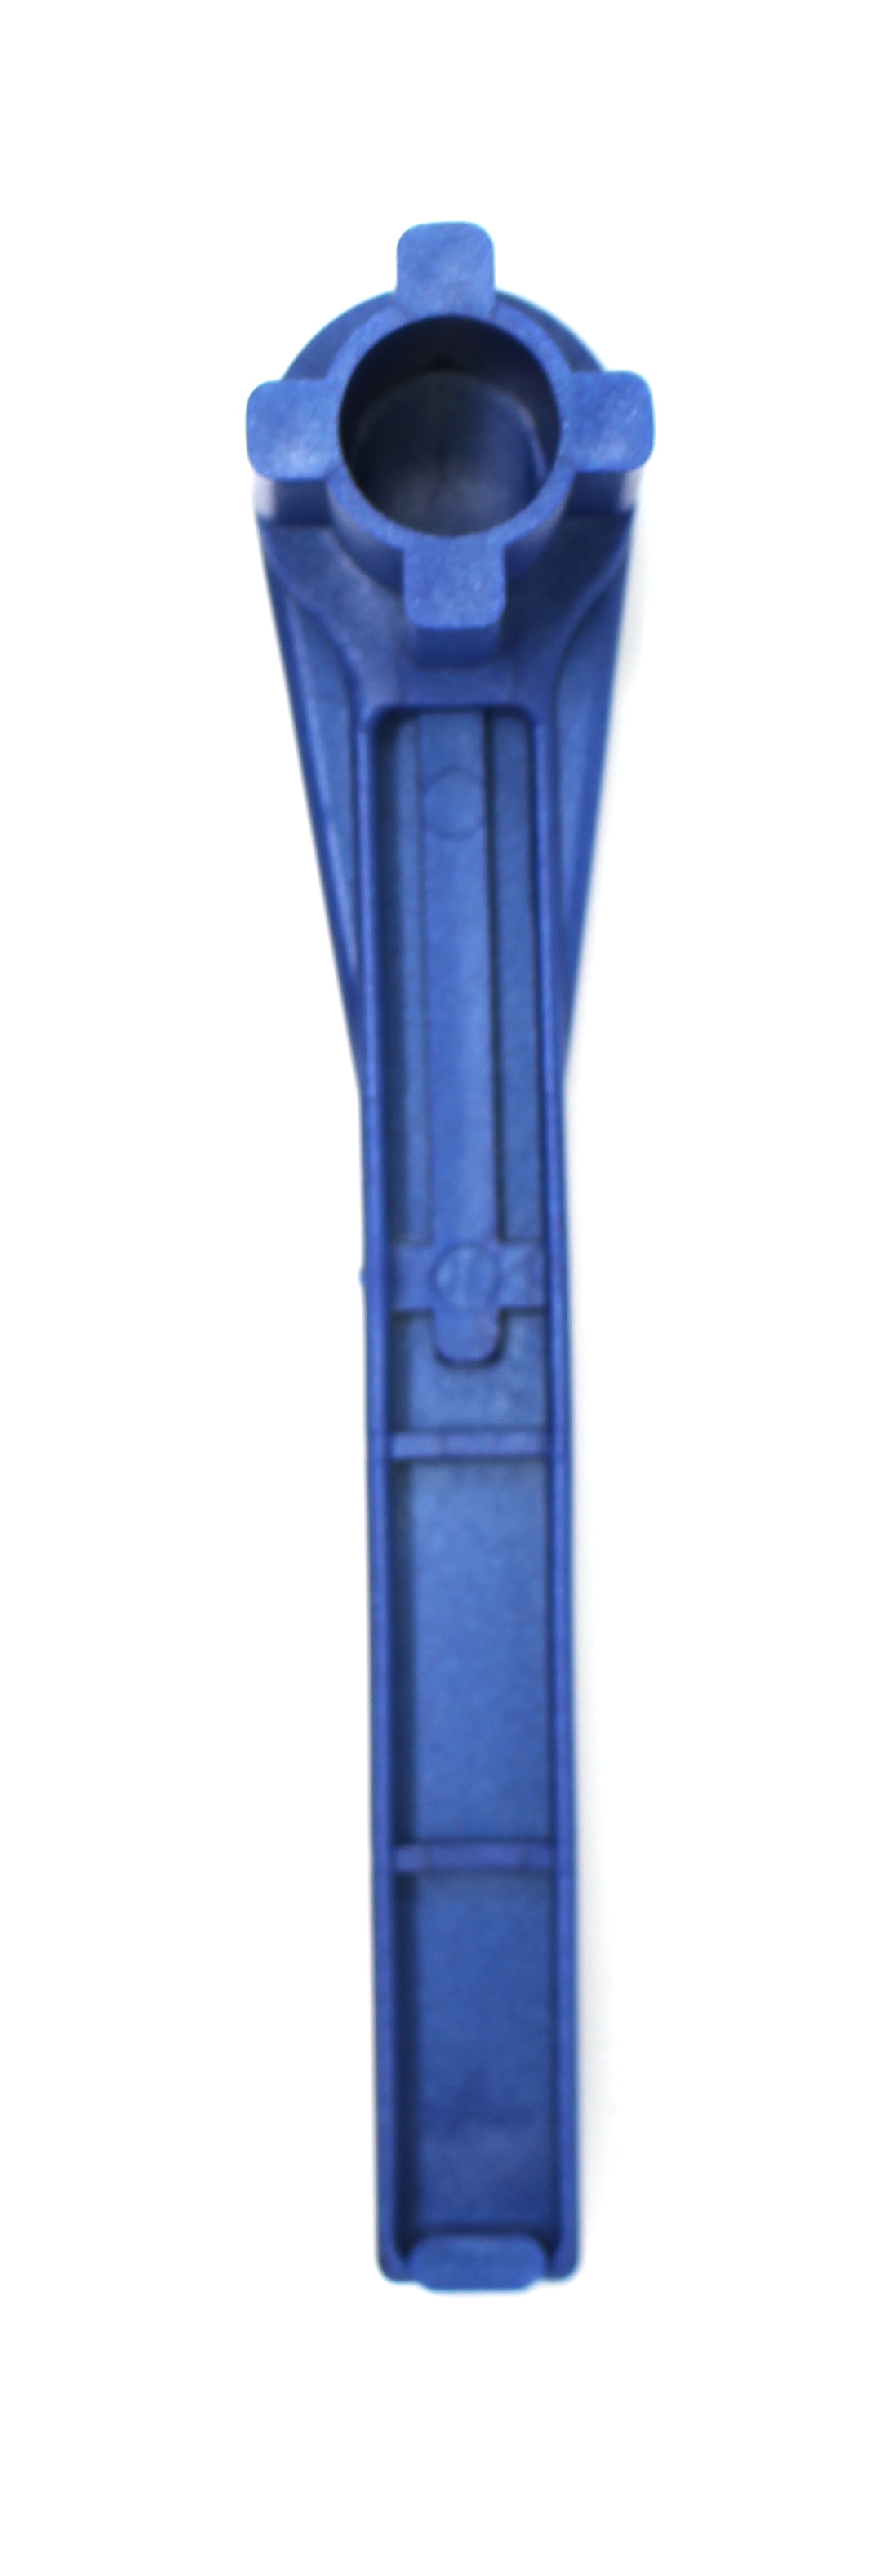 Gas and Bung Wrench Non Sparking Solid Drum Bung Nut Wrench (BLUE) - image 4 of 9